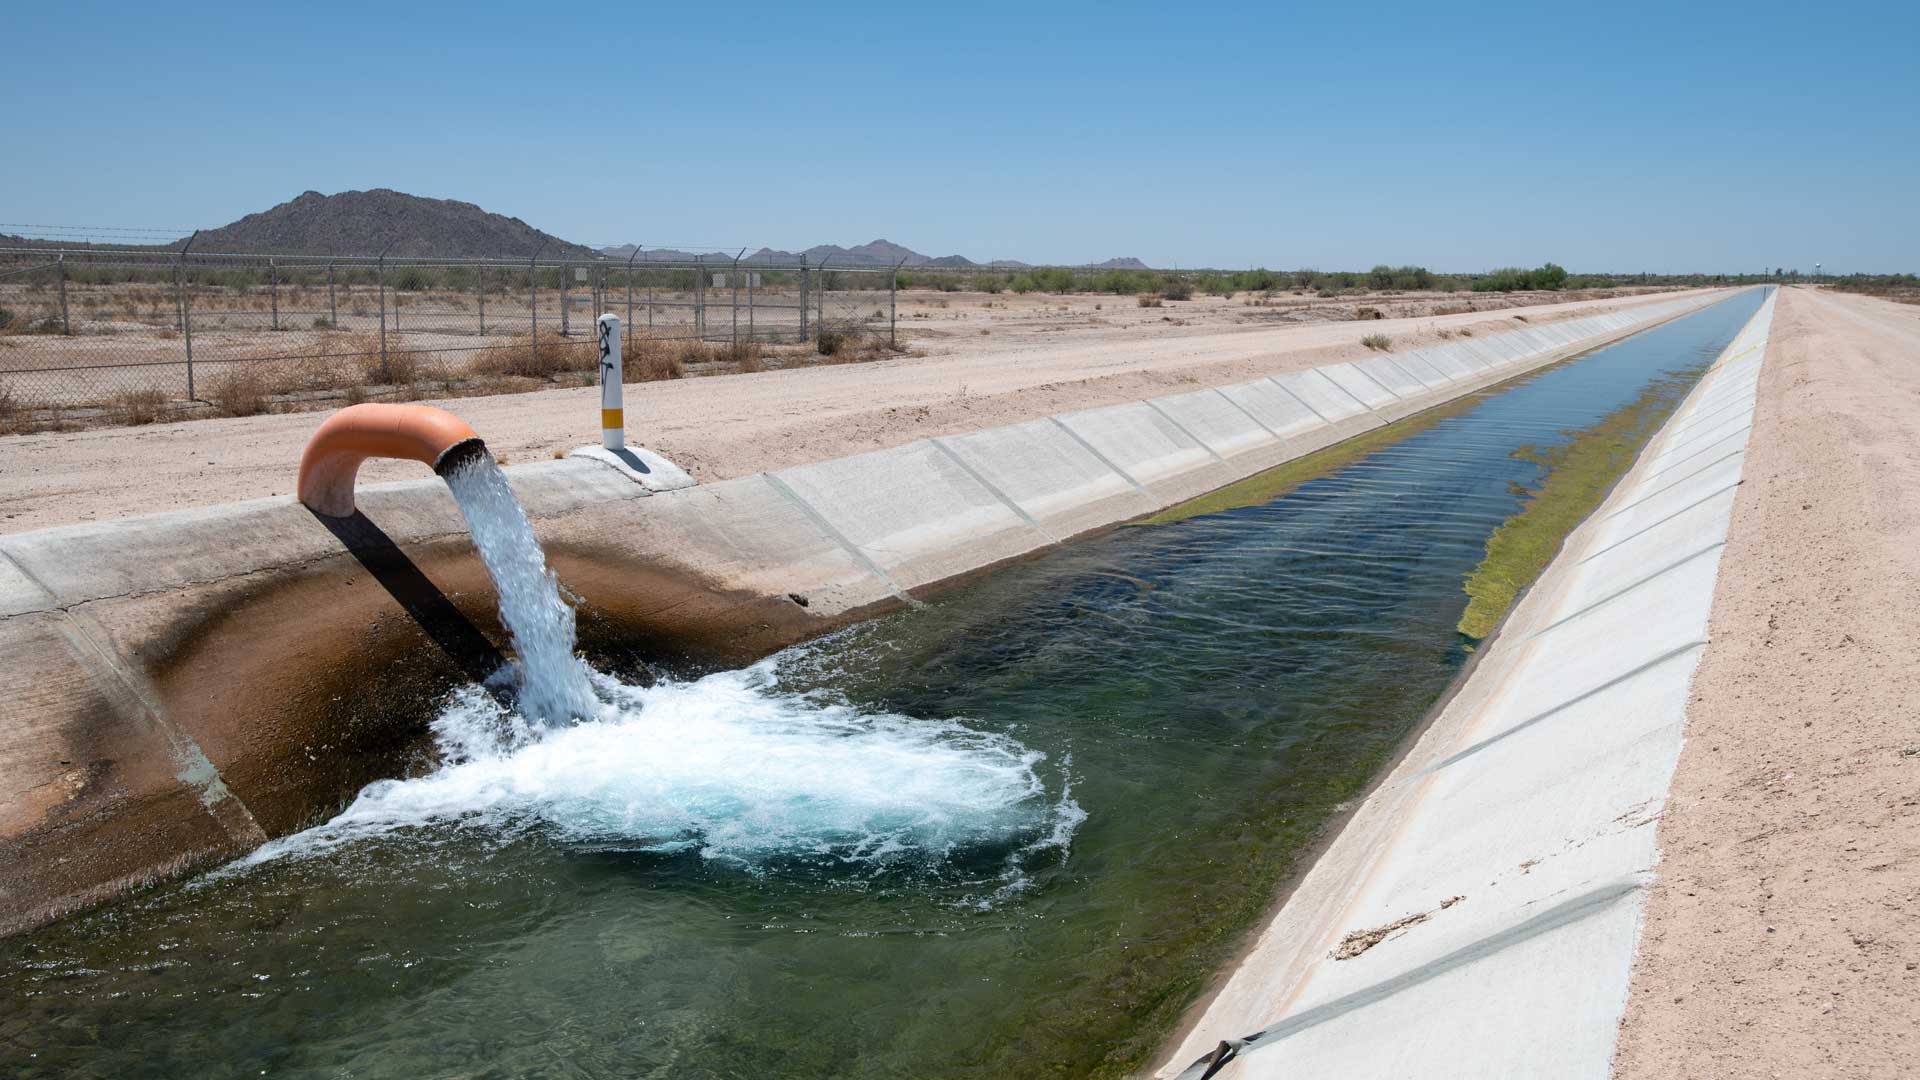 Gila River Indian Community says it doesn't support latest Colorado River sharing proposals